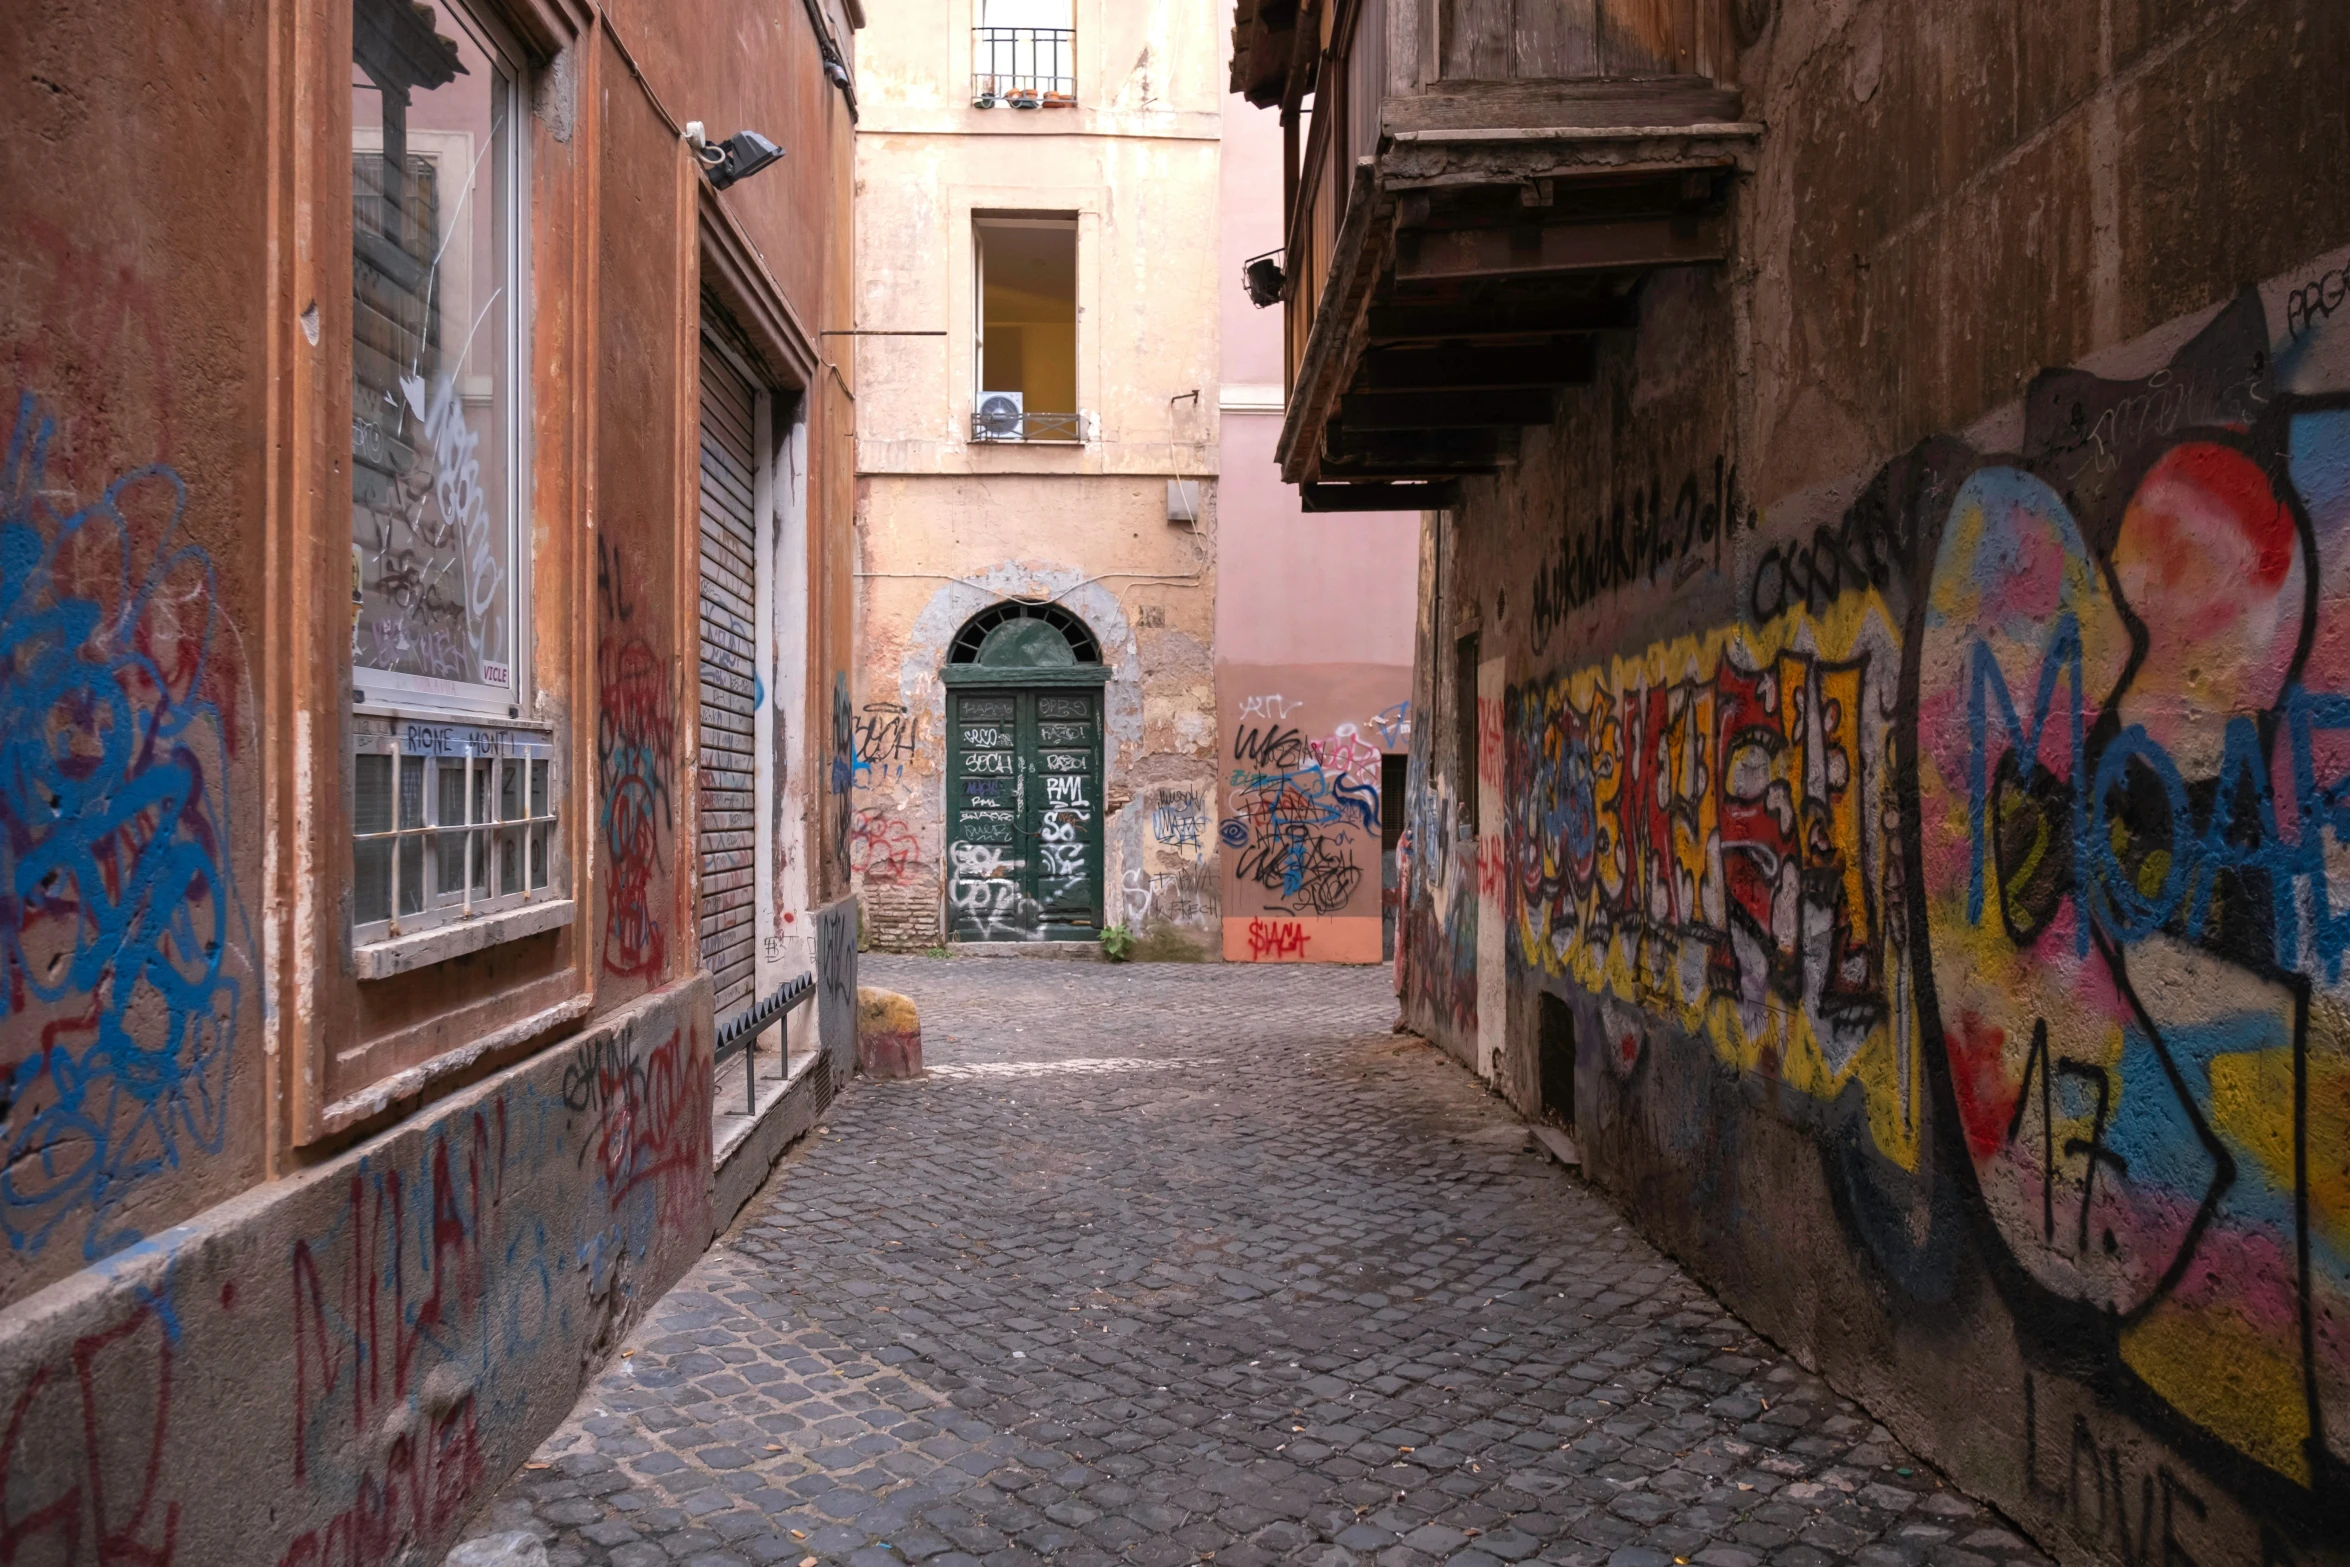 graffiti covered buildings next to a cobblestone alleyway